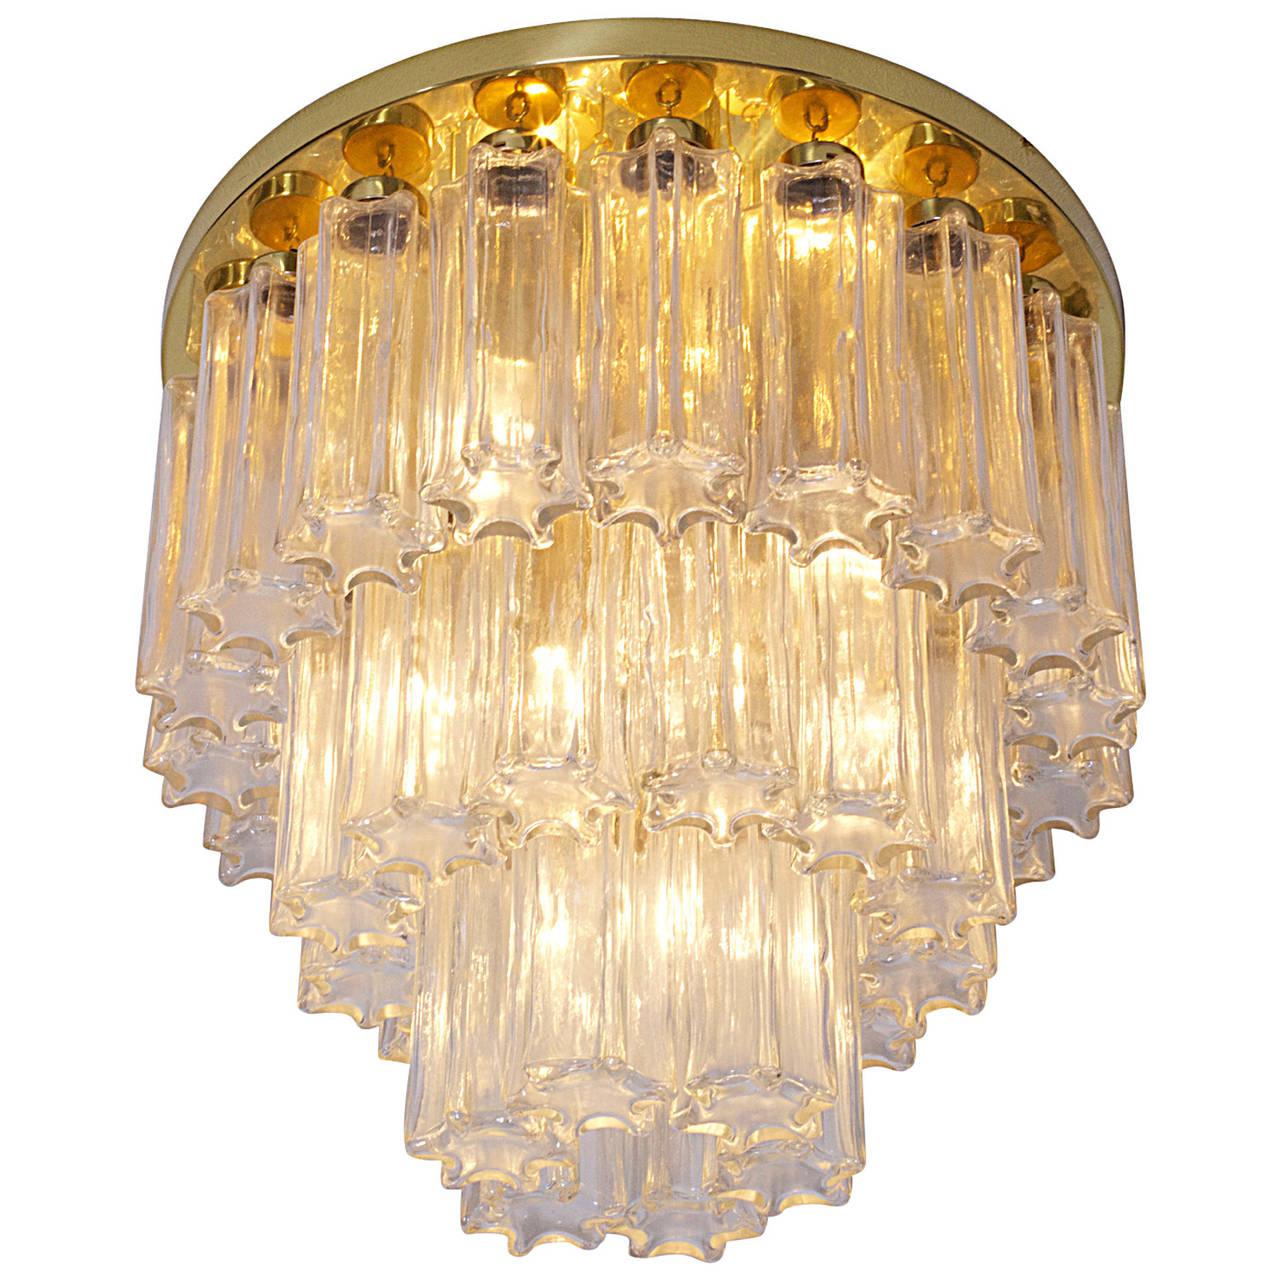 Limburg Murano clear beige glass flush mount chandelier.
Venini Murano glass pendants, each with brass fittings.
Brass ceiling plate.
Italy, 1965-1969.
6 lights, rewired for the US
In excellent condition.